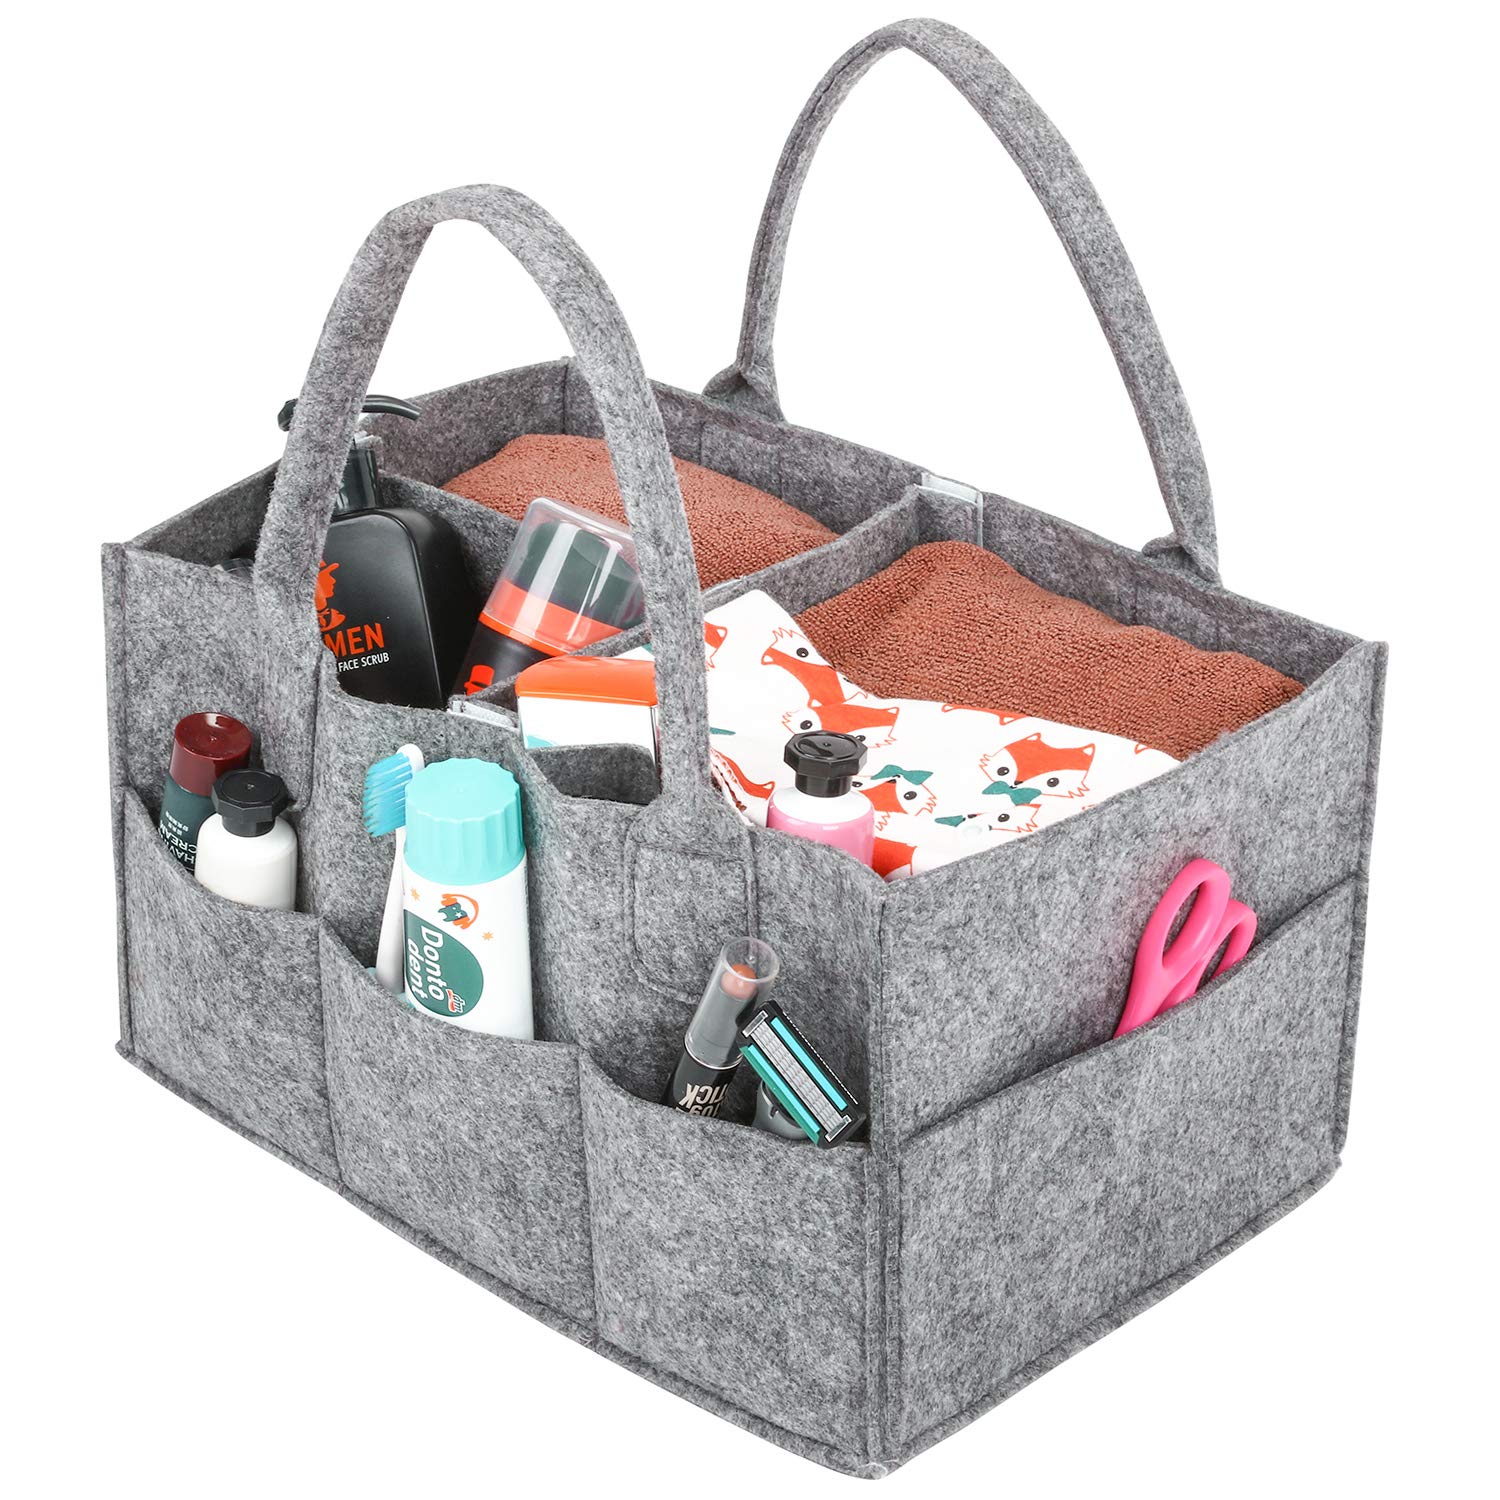 Amazon Brand – Umi Baby Diaper Caddy Nursery Storage Bin Felt Basket Diapers Organizer Baby Wipes Bag with Changeable Compartments, Portable Multipurpose Basket for Car Travel, Nappy Bags for Mom,Grey